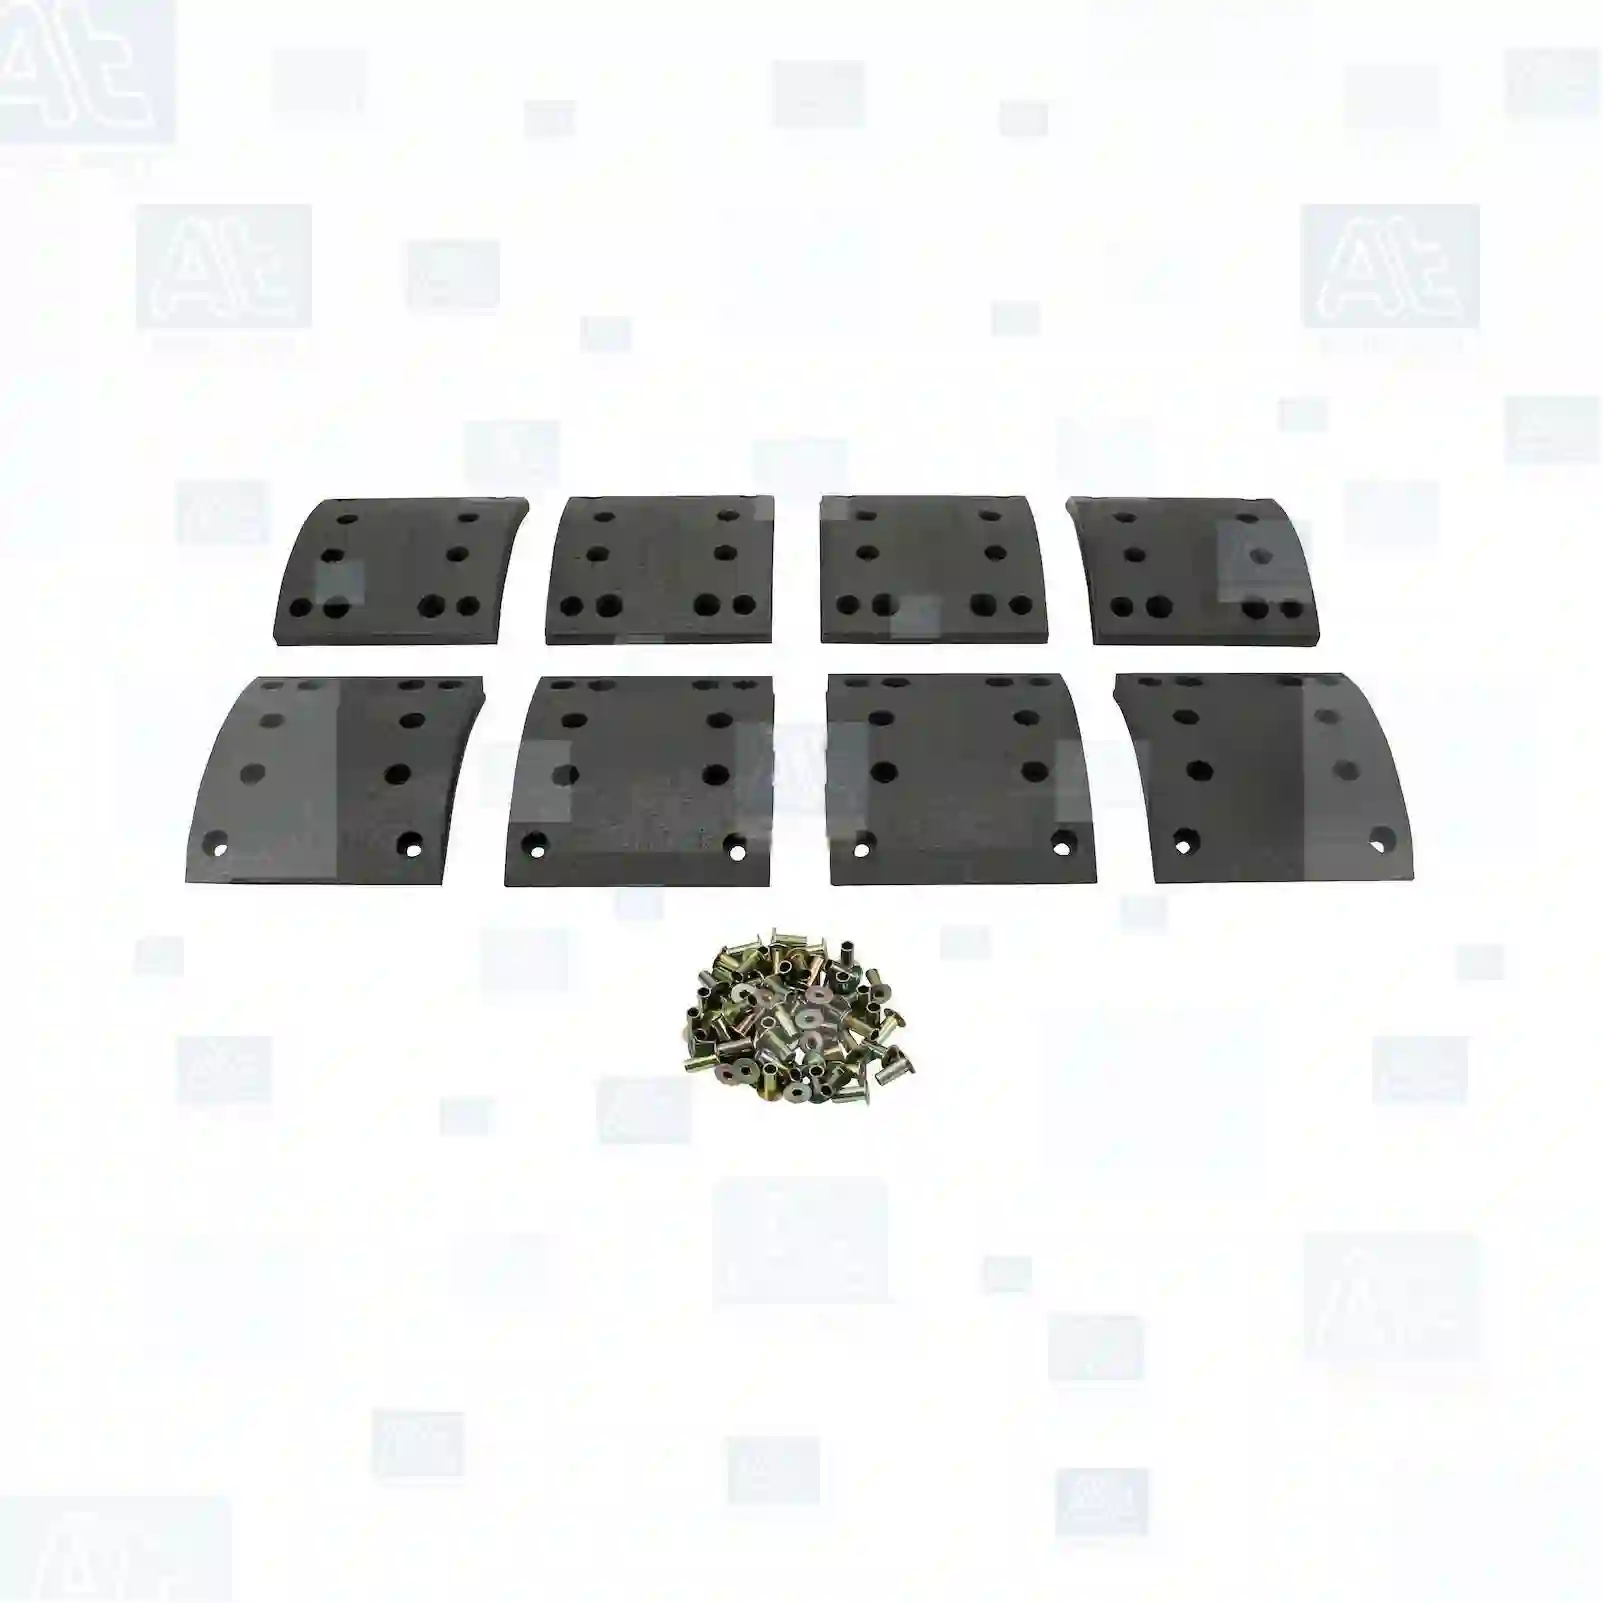 Drum brake lining kit, axle kit - oversize, at no 77715736, oem no: 81502200335, 81502200338, 81502200419, 81502200454, 81502200515, 81502200520, 81502200545, 81502200607, 81502200631, 81502200643, 81502200652, 81502200685, 81502200702, 81502200704, 81502200706, 81502200708, 81502200710, 81502200762, 81502200997, 81502210163, 81502210216, 81502210417, 81502210437, 81502210522, 81502210841, 81502210945, 81502216087, 81502216095, 88502200037, 3054210110, 3464230410, 3464231310, 3464231610, 3464233210, 3464233810, 3464235910, 3464236210, 3604230510, 3604230810, 3604232010, 3814232310, 3854210110, 3854210410, 3854210810, 3854231610, 6174230911, 6174231930, 6174232111, 6174233210, 6174234910, 6174234911, 6174236910, 6174238910, 6214210210, 6214210610, 6214211010, 6524231010 At Spare Part | Engine, Accelerator Pedal, Camshaft, Connecting Rod, Crankcase, Crankshaft, Cylinder Head, Engine Suspension Mountings, Exhaust Manifold, Exhaust Gas Recirculation, Filter Kits, Flywheel Housing, General Overhaul Kits, Engine, Intake Manifold, Oil Cleaner, Oil Cooler, Oil Filter, Oil Pump, Oil Sump, Piston & Liner, Sensor & Switch, Timing Case, Turbocharger, Cooling System, Belt Tensioner, Coolant Filter, Coolant Pipe, Corrosion Prevention Agent, Drive, Expansion Tank, Fan, Intercooler, Monitors & Gauges, Radiator, Thermostat, V-Belt / Timing belt, Water Pump, Fuel System, Electronical Injector Unit, Feed Pump, Fuel Filter, cpl., Fuel Gauge Sender,  Fuel Line, Fuel Pump, Fuel Tank, Injection Line Kit, Injection Pump, Exhaust System, Clutch & Pedal, Gearbox, Propeller Shaft, Axles, Brake System, Hubs & Wheels, Suspension, Leaf Spring, Universal Parts / Accessories, Steering, Electrical System, Cabin Drum brake lining kit, axle kit - oversize, at no 77715736, oem no: 81502200335, 81502200338, 81502200419, 81502200454, 81502200515, 81502200520, 81502200545, 81502200607, 81502200631, 81502200643, 81502200652, 81502200685, 81502200702, 81502200704, 81502200706, 81502200708, 81502200710, 81502200762, 81502200997, 81502210163, 81502210216, 81502210417, 81502210437, 81502210522, 81502210841, 81502210945, 81502216087, 81502216095, 88502200037, 3054210110, 3464230410, 3464231310, 3464231610, 3464233210, 3464233810, 3464235910, 3464236210, 3604230510, 3604230810, 3604232010, 3814232310, 3854210110, 3854210410, 3854210810, 3854231610, 6174230911, 6174231930, 6174232111, 6174233210, 6174234910, 6174234911, 6174236910, 6174238910, 6214210210, 6214210610, 6214211010, 6524231010 At Spare Part | Engine, Accelerator Pedal, Camshaft, Connecting Rod, Crankcase, Crankshaft, Cylinder Head, Engine Suspension Mountings, Exhaust Manifold, Exhaust Gas Recirculation, Filter Kits, Flywheel Housing, General Overhaul Kits, Engine, Intake Manifold, Oil Cleaner, Oil Cooler, Oil Filter, Oil Pump, Oil Sump, Piston & Liner, Sensor & Switch, Timing Case, Turbocharger, Cooling System, Belt Tensioner, Coolant Filter, Coolant Pipe, Corrosion Prevention Agent, Drive, Expansion Tank, Fan, Intercooler, Monitors & Gauges, Radiator, Thermostat, V-Belt / Timing belt, Water Pump, Fuel System, Electronical Injector Unit, Feed Pump, Fuel Filter, cpl., Fuel Gauge Sender,  Fuel Line, Fuel Pump, Fuel Tank, Injection Line Kit, Injection Pump, Exhaust System, Clutch & Pedal, Gearbox, Propeller Shaft, Axles, Brake System, Hubs & Wheels, Suspension, Leaf Spring, Universal Parts / Accessories, Steering, Electrical System, Cabin